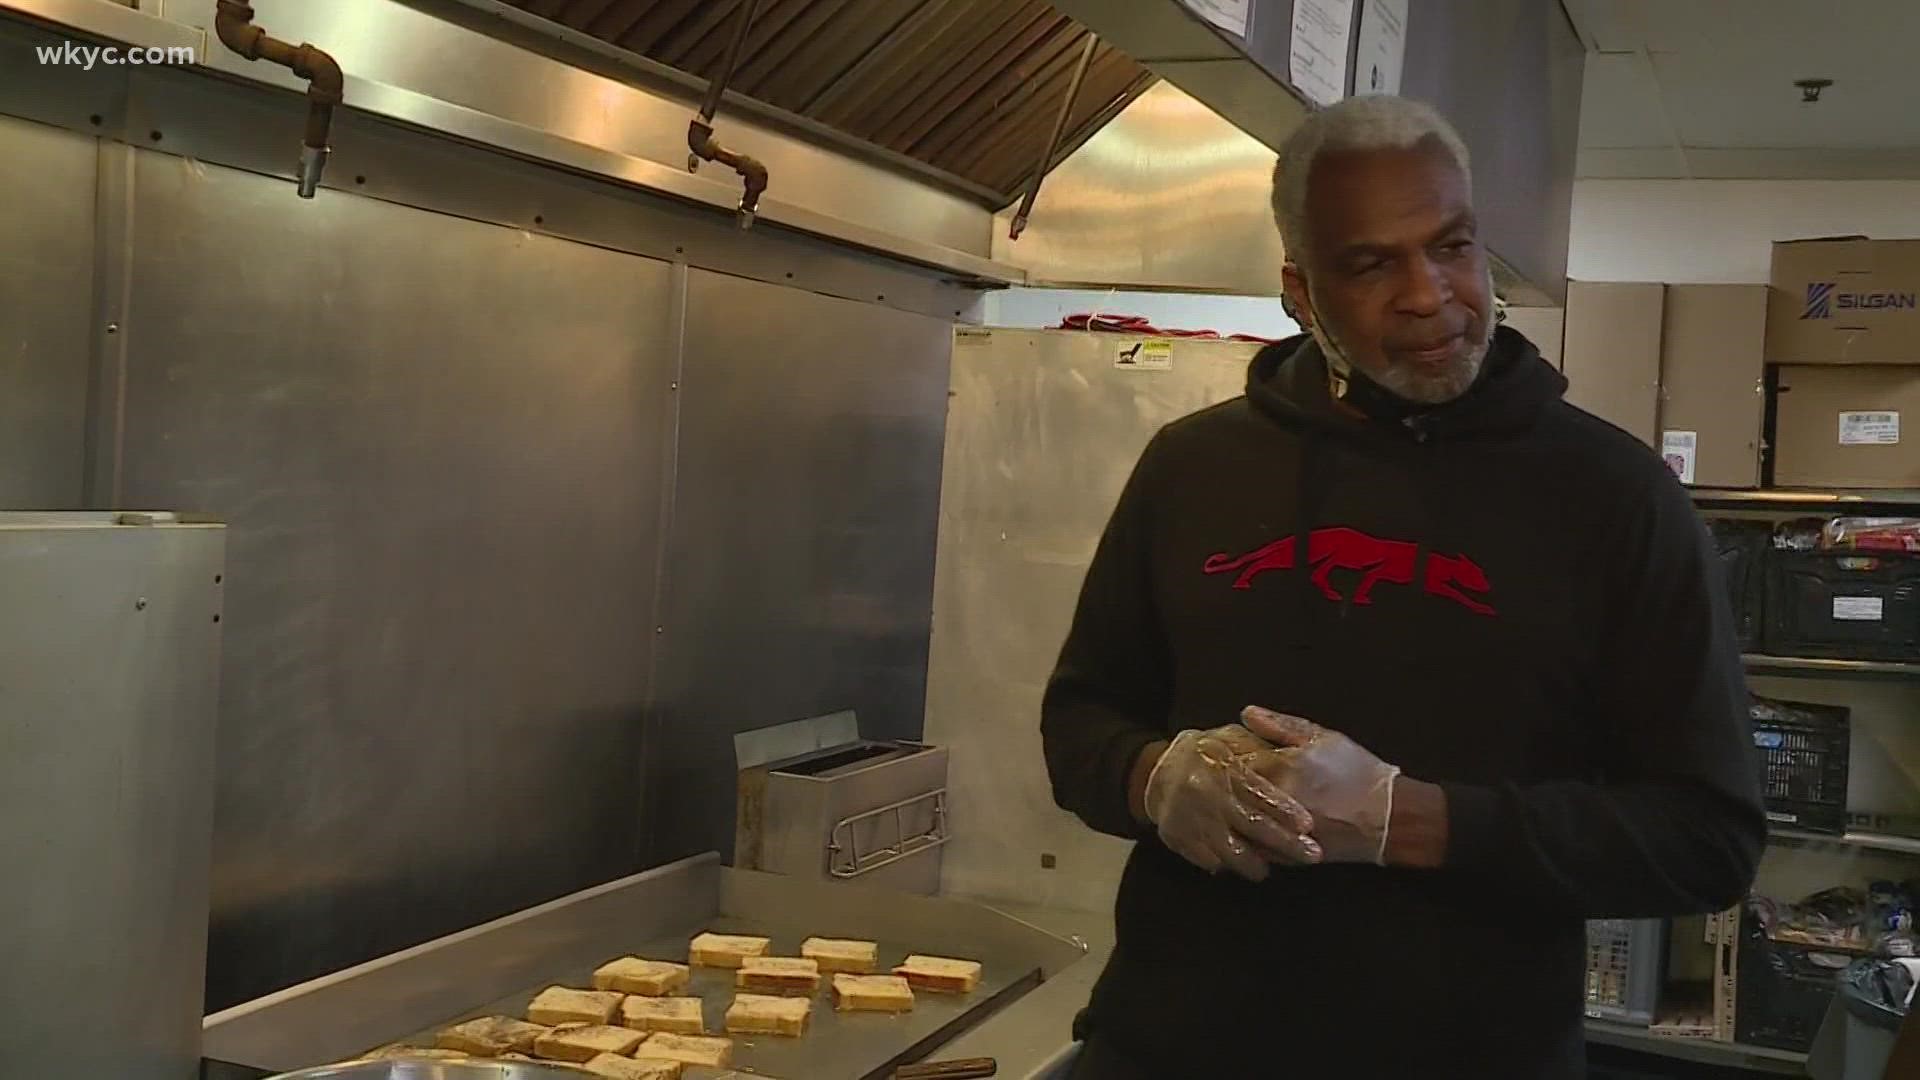 Former basketball star and Cleveland native Charles Oakley is back in the city to cook meals for those in need ahead of the NBA All-Star weekend.